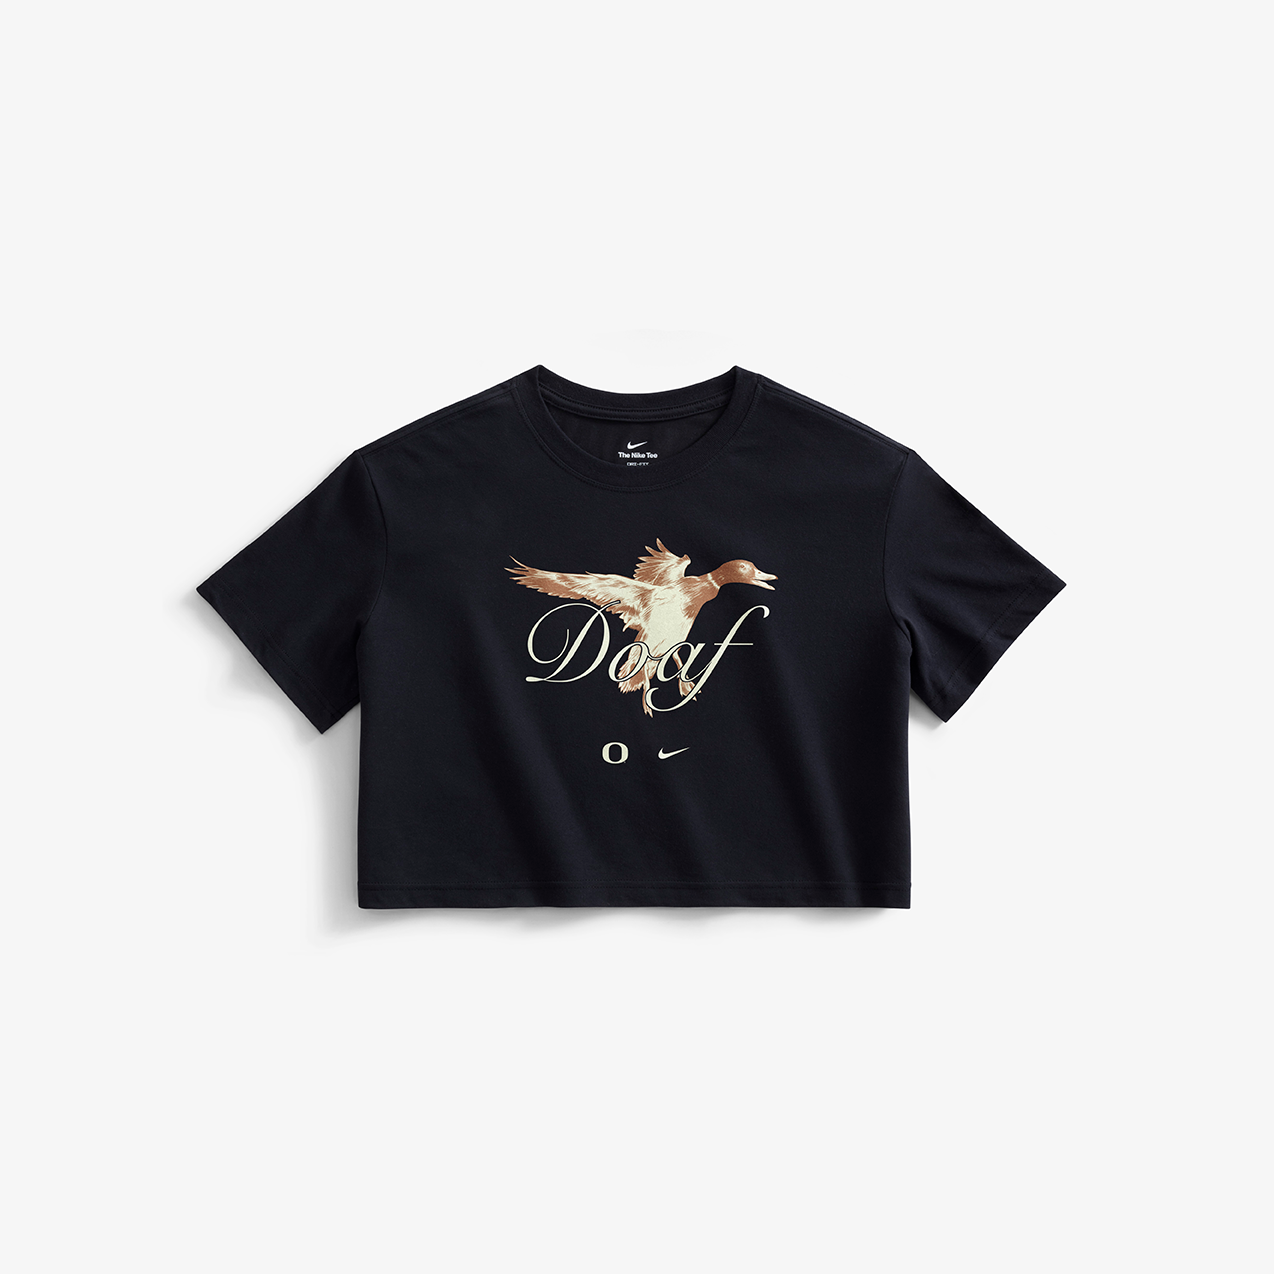 THE FLOCK Women's Cropped Tee